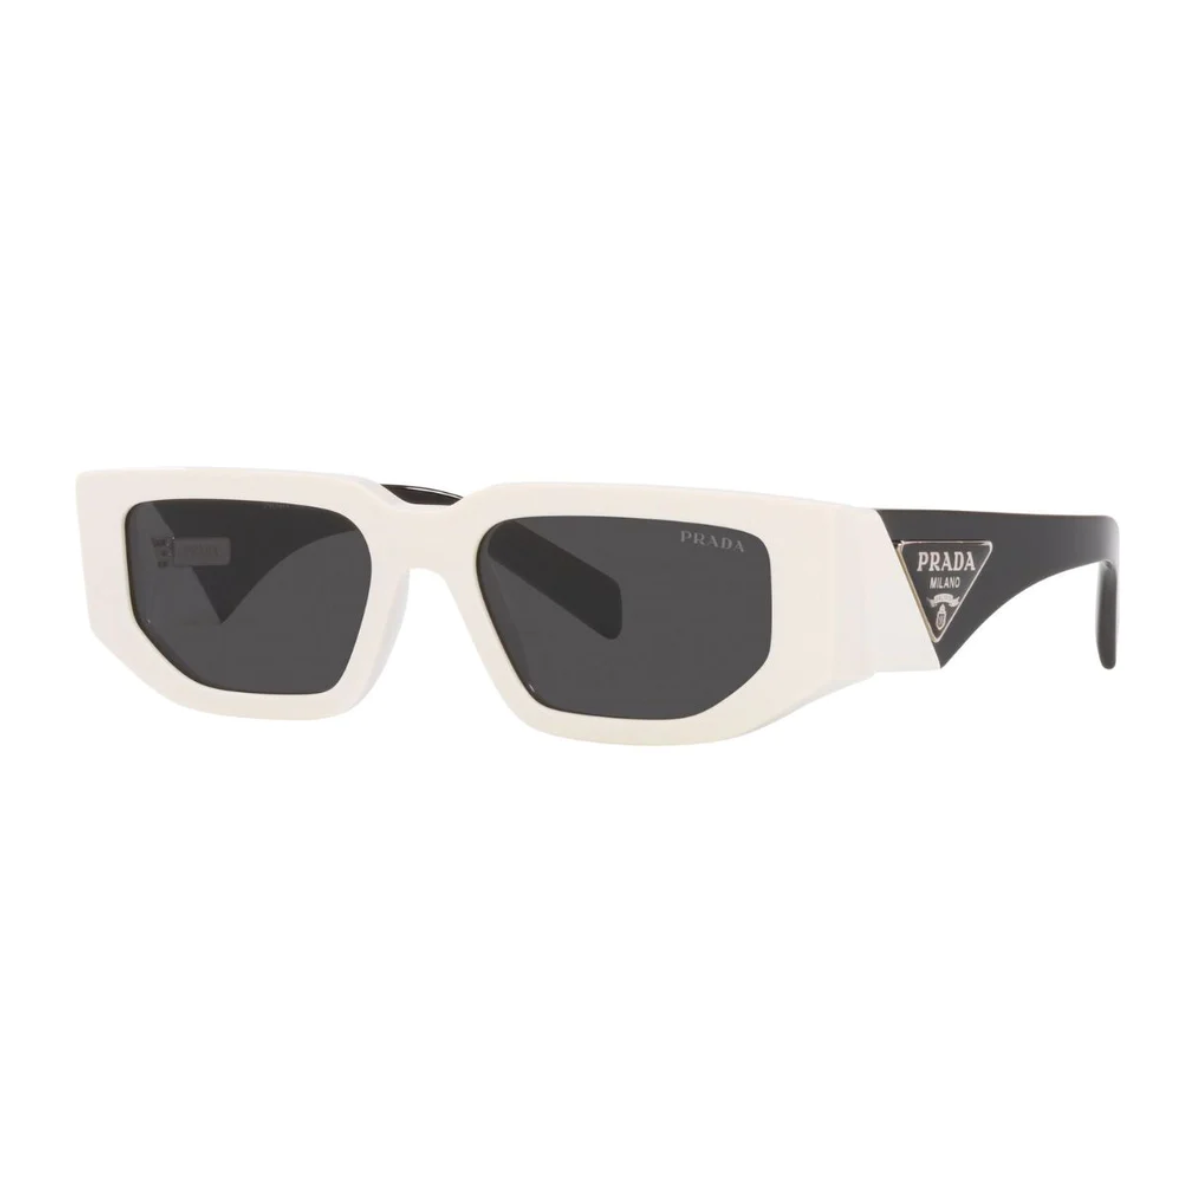 "Elevate your eyewear game with Prada SPR 09Z 142-5S0 sunglasses from Optorium. Perfect for men and women, these cool grey rectangle shades with a butterfly shape are a must-have for your summer ensemble."